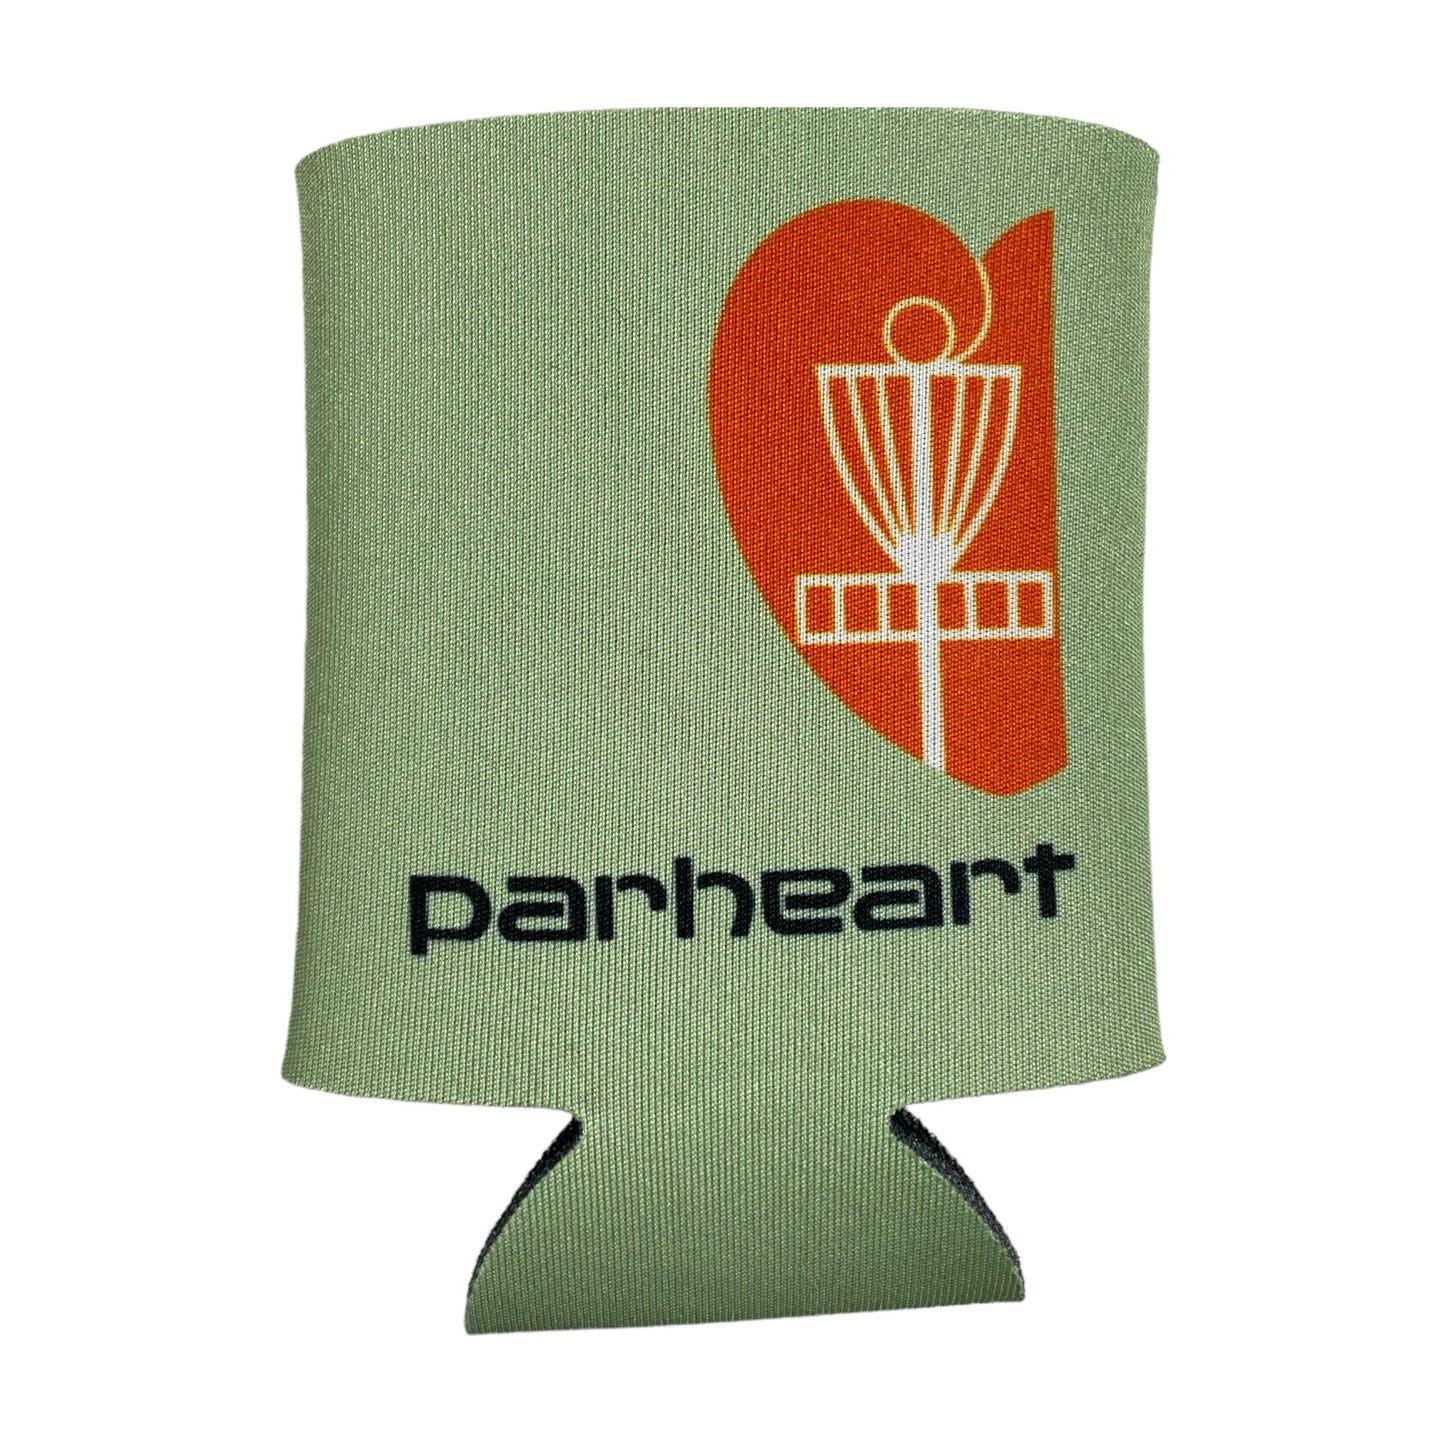 Perks and Re-creation Parheart Koozie Disc Golf